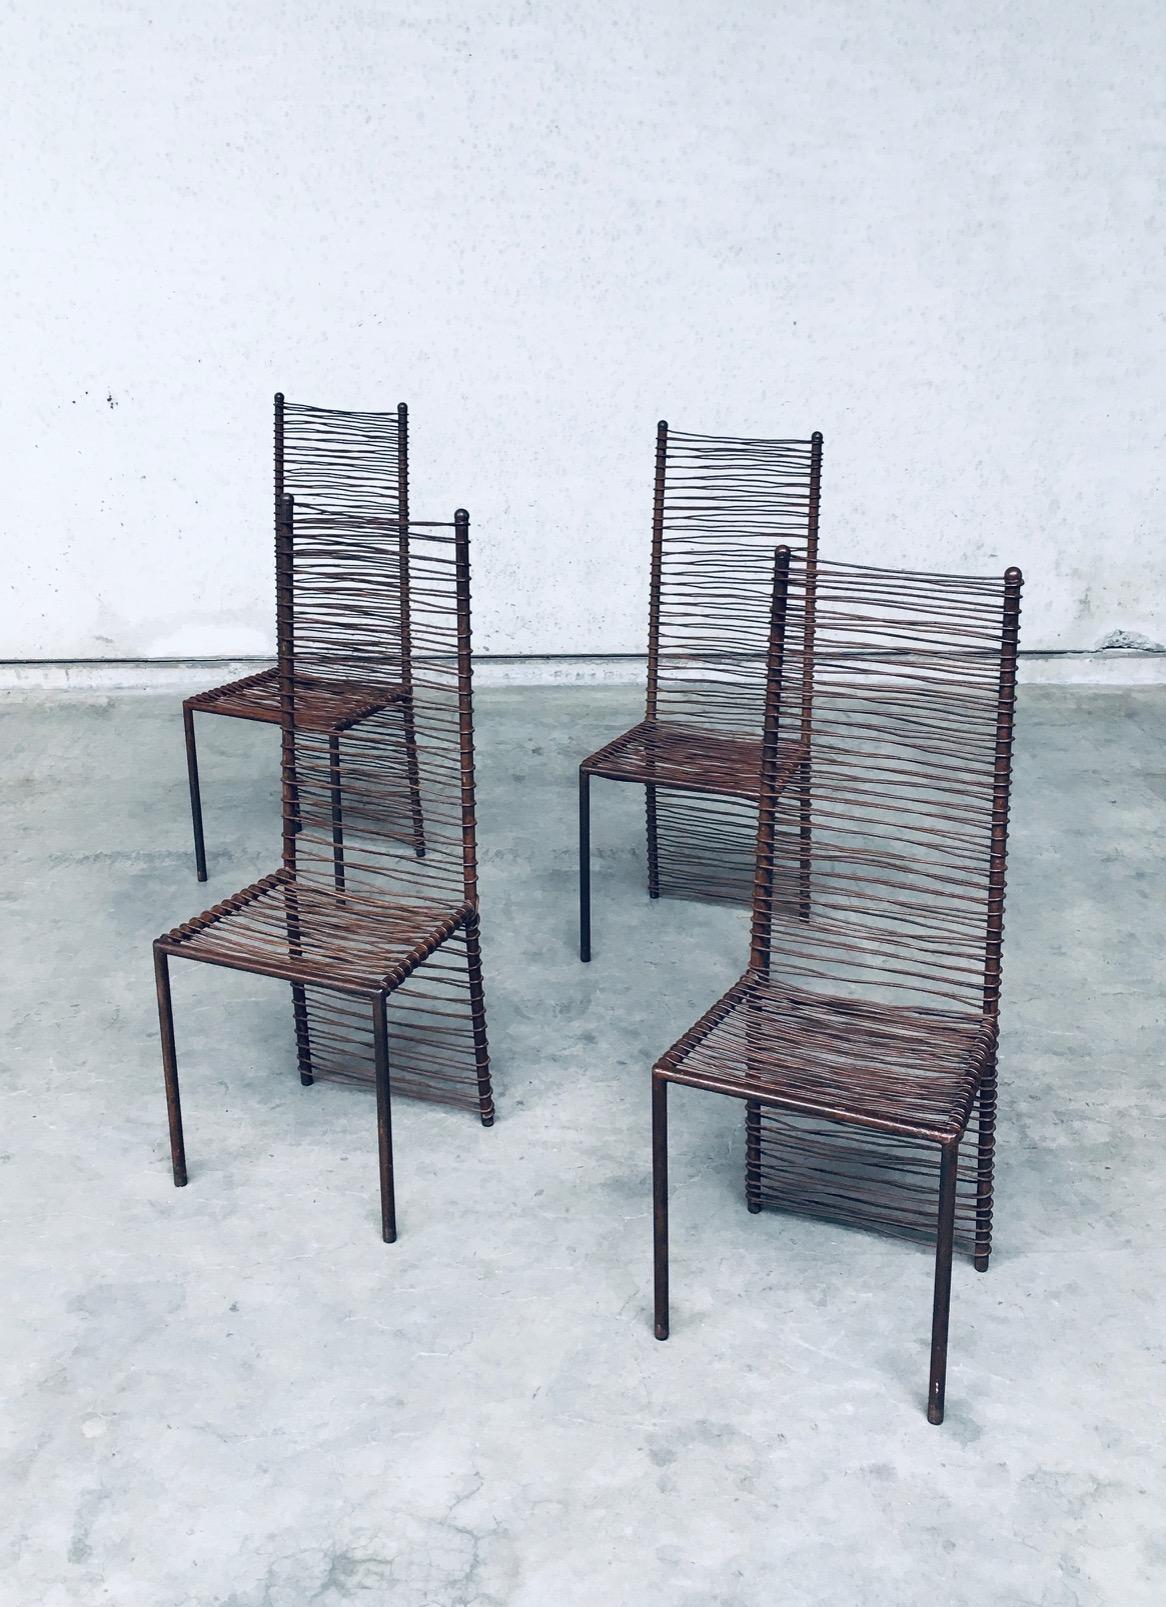 Vintage Postmodern Design One of a Kind Handcrafted Iron High Back Chair set of 4, made in the 1980's. All iron constructed handmade chairs. High back model with welded wrapped wire on back and seat. Iron has been controlled patinated and treated.